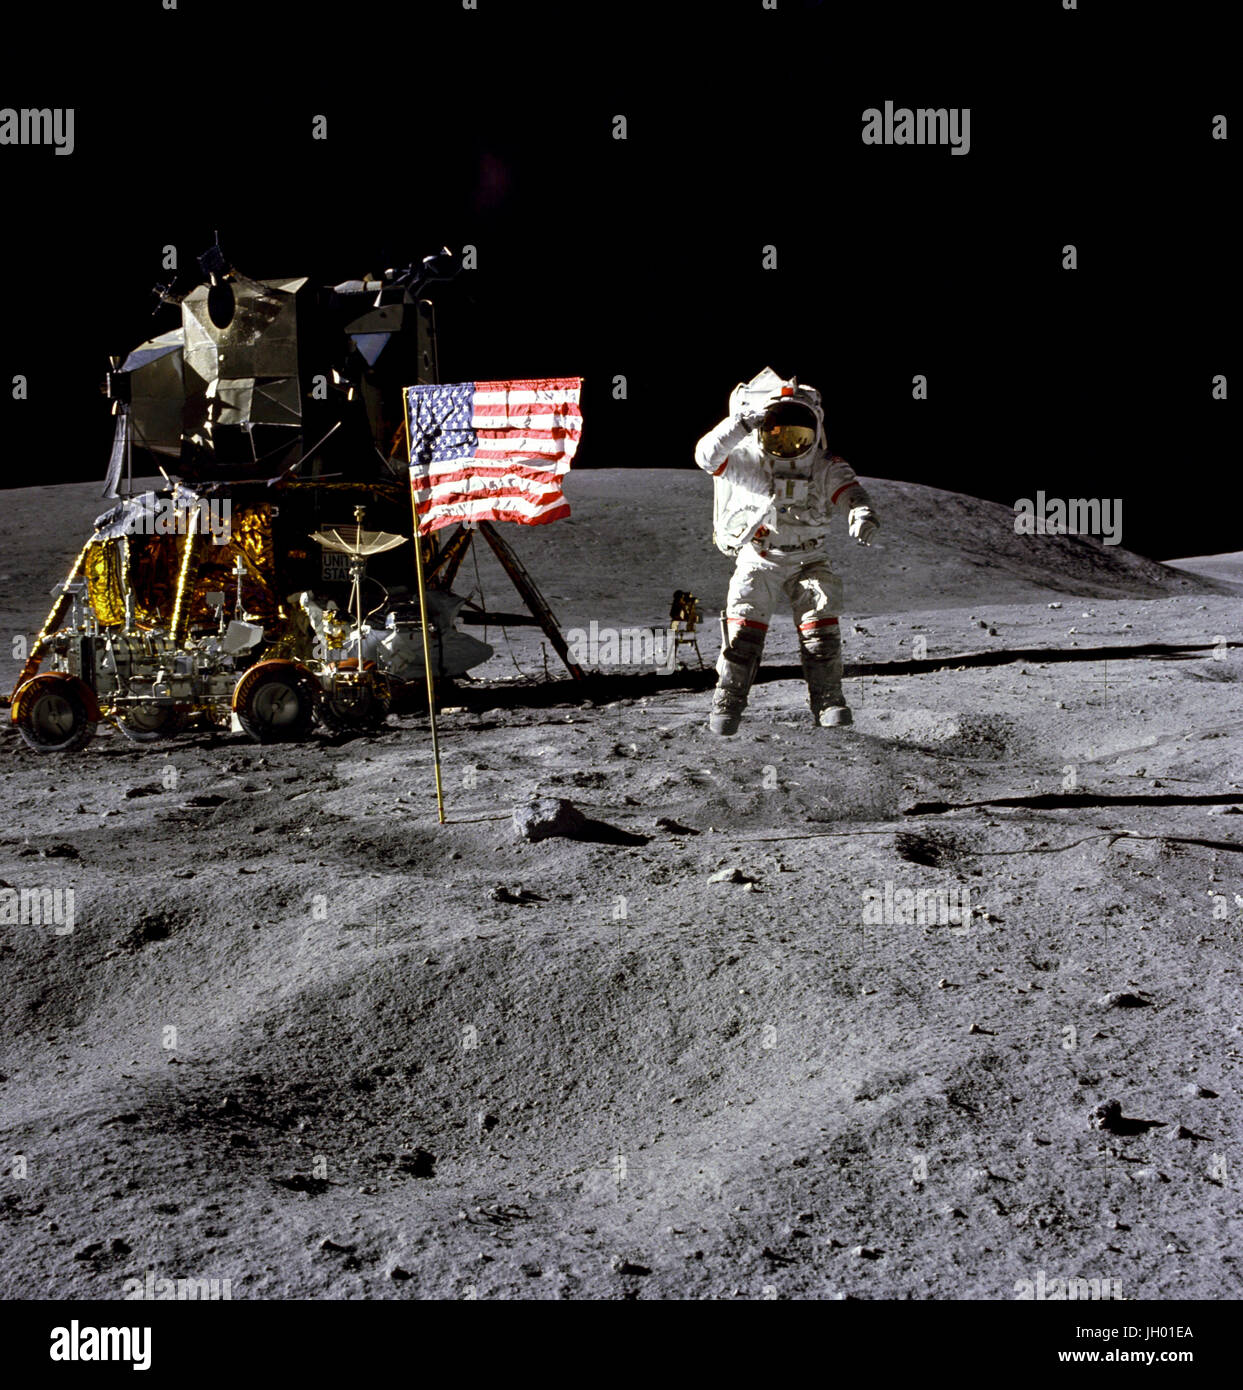 Young. Astronaut John W. Young, commander of the Apollo 16 lunar landing mission, jumps up from the lunar surface as he salutes the U.S. Flag at the Descartes landing site during the first Apollo 16 extravehicular activity (EVA-1). Astronaut Charles M. Duke Jr., lunar module pilot, took this picture. The Lunar Module (LM) 'Orion' is on the left. The Lunar Roving Vehicle is parked beside the LM. The object behind Young in the shade of the LM is the Far Ultraviolet Camera/Spectrograph. Stone Mountain dominates the background in this lunar scene. Photographer: NASA /Charles M. Duke Jr. Stock Photo